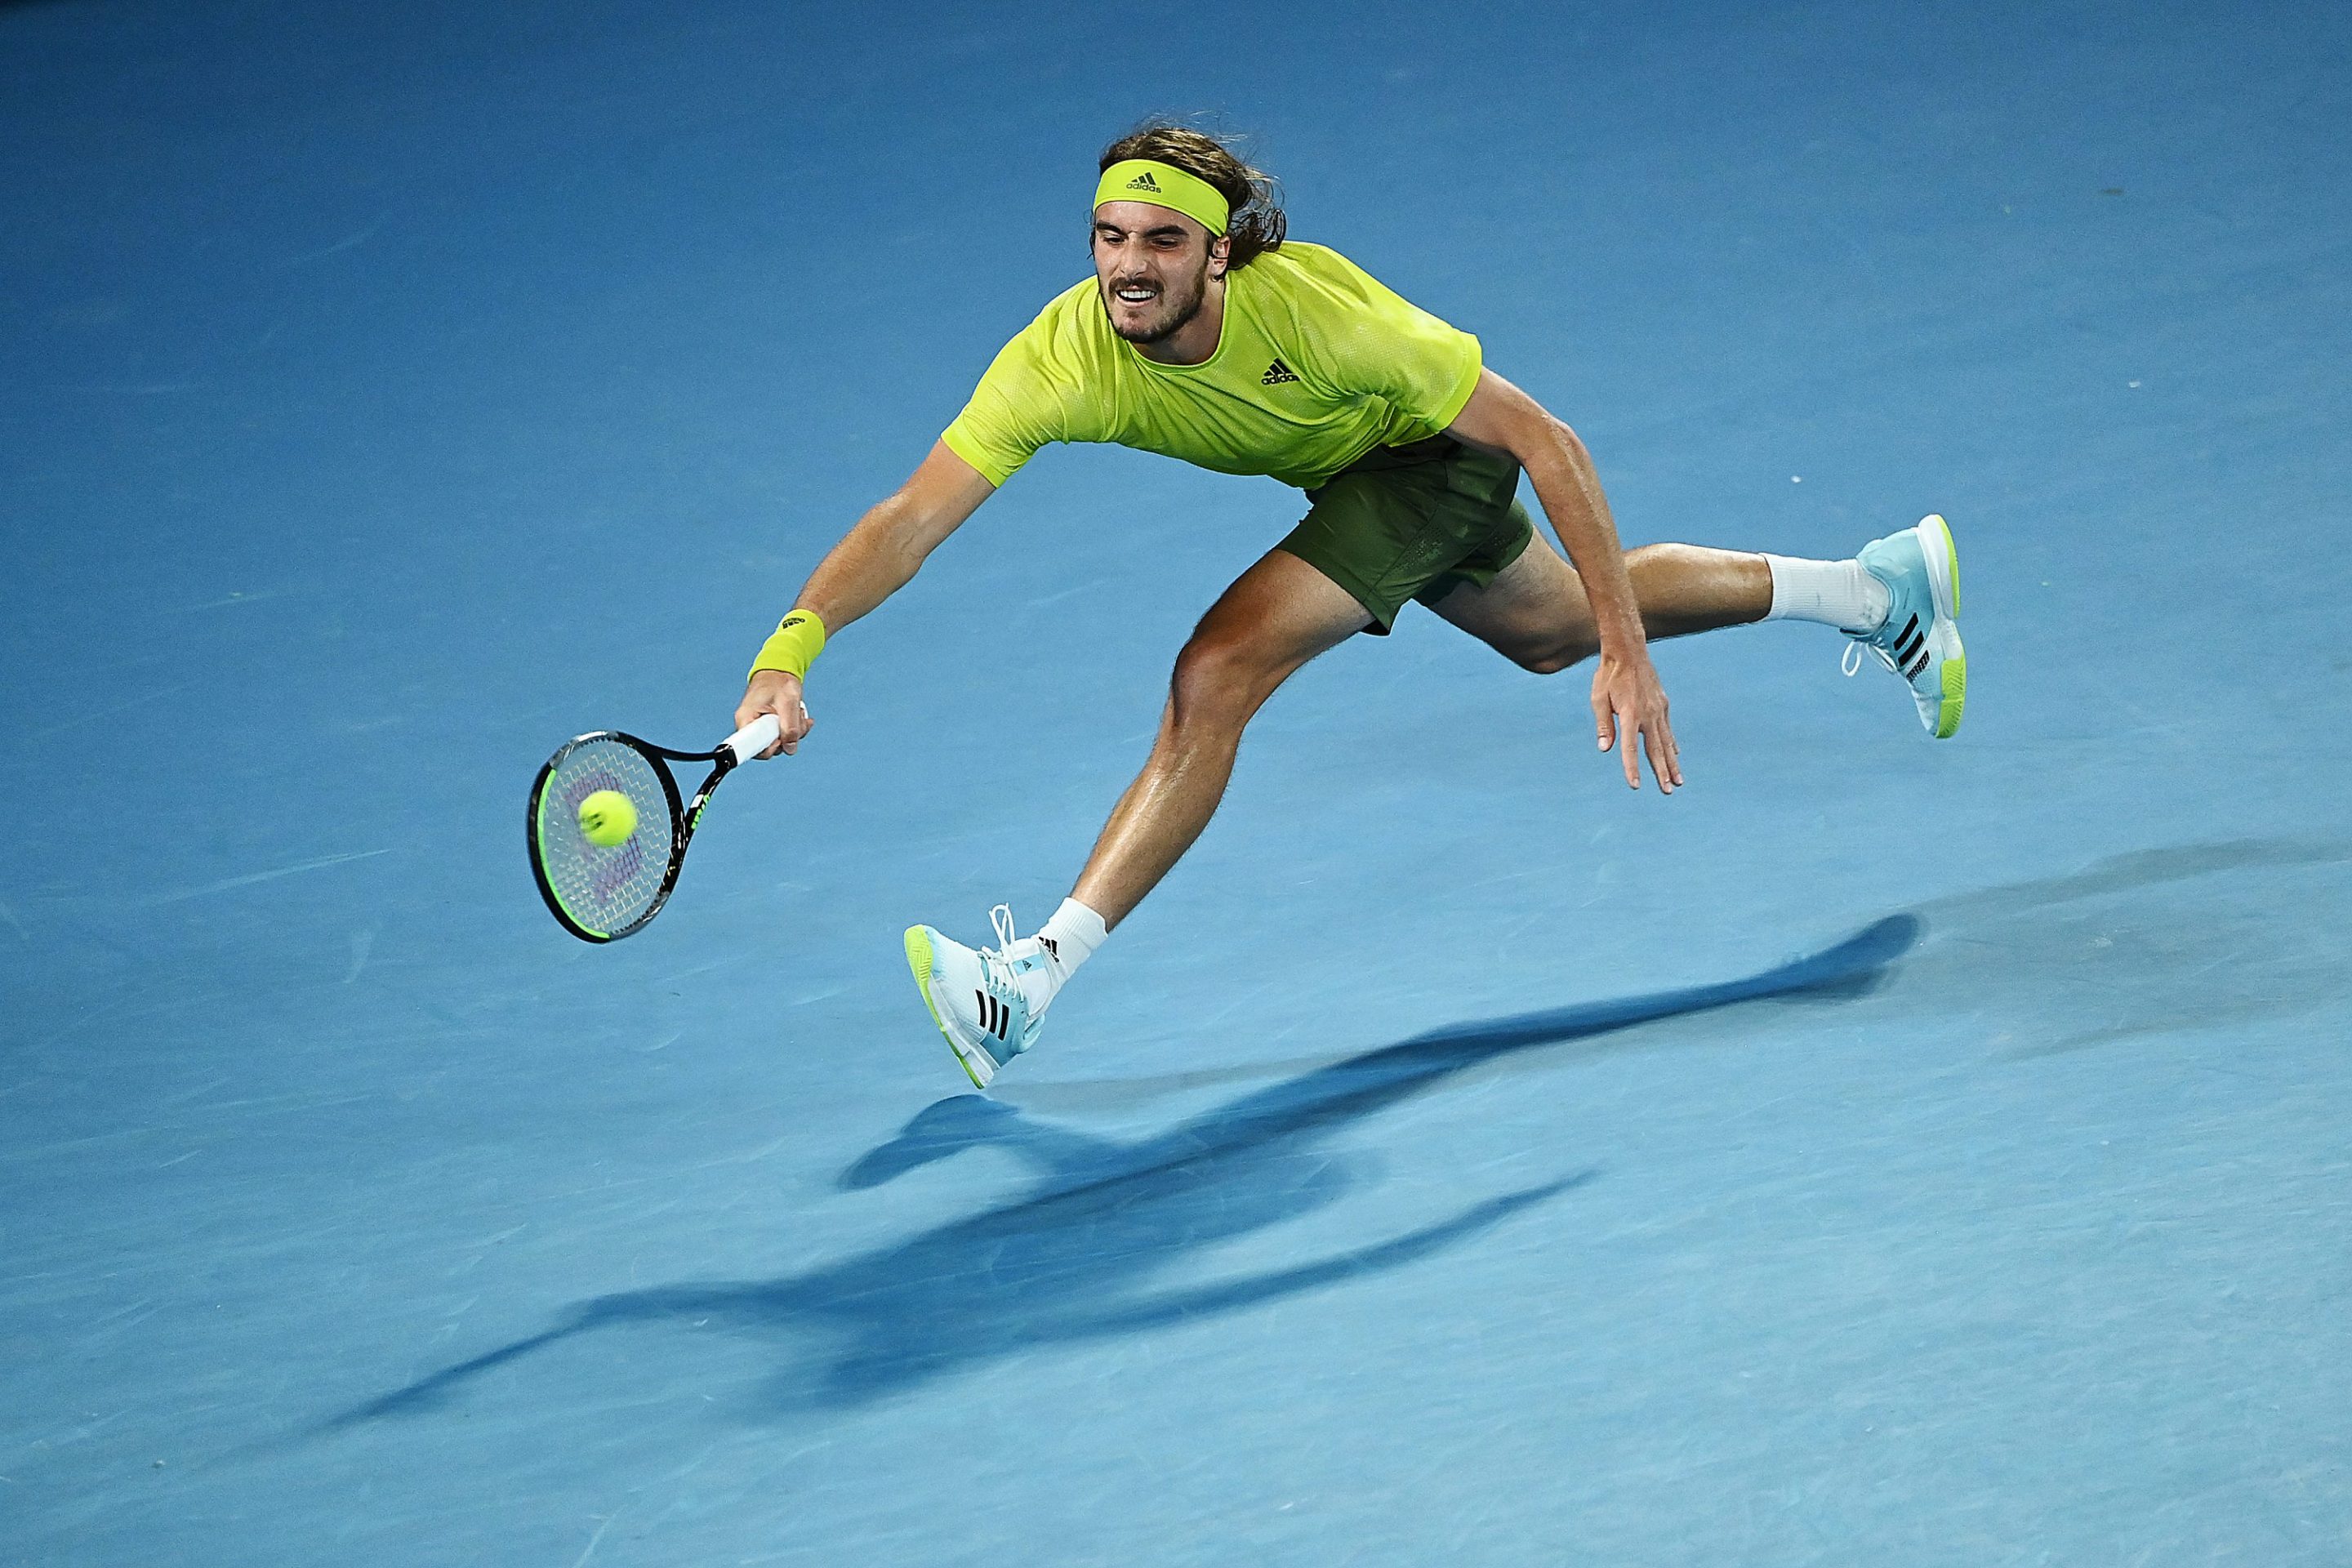 Stefanos Tsitsipas of Greece plays a forehand during his Men’s Singles Quarterfinals match against Rafael Nadal of Spain during day 10 of the 2021 Australian Open at Melbourne Park on February 17, 2021 in Melbourne, Australia.